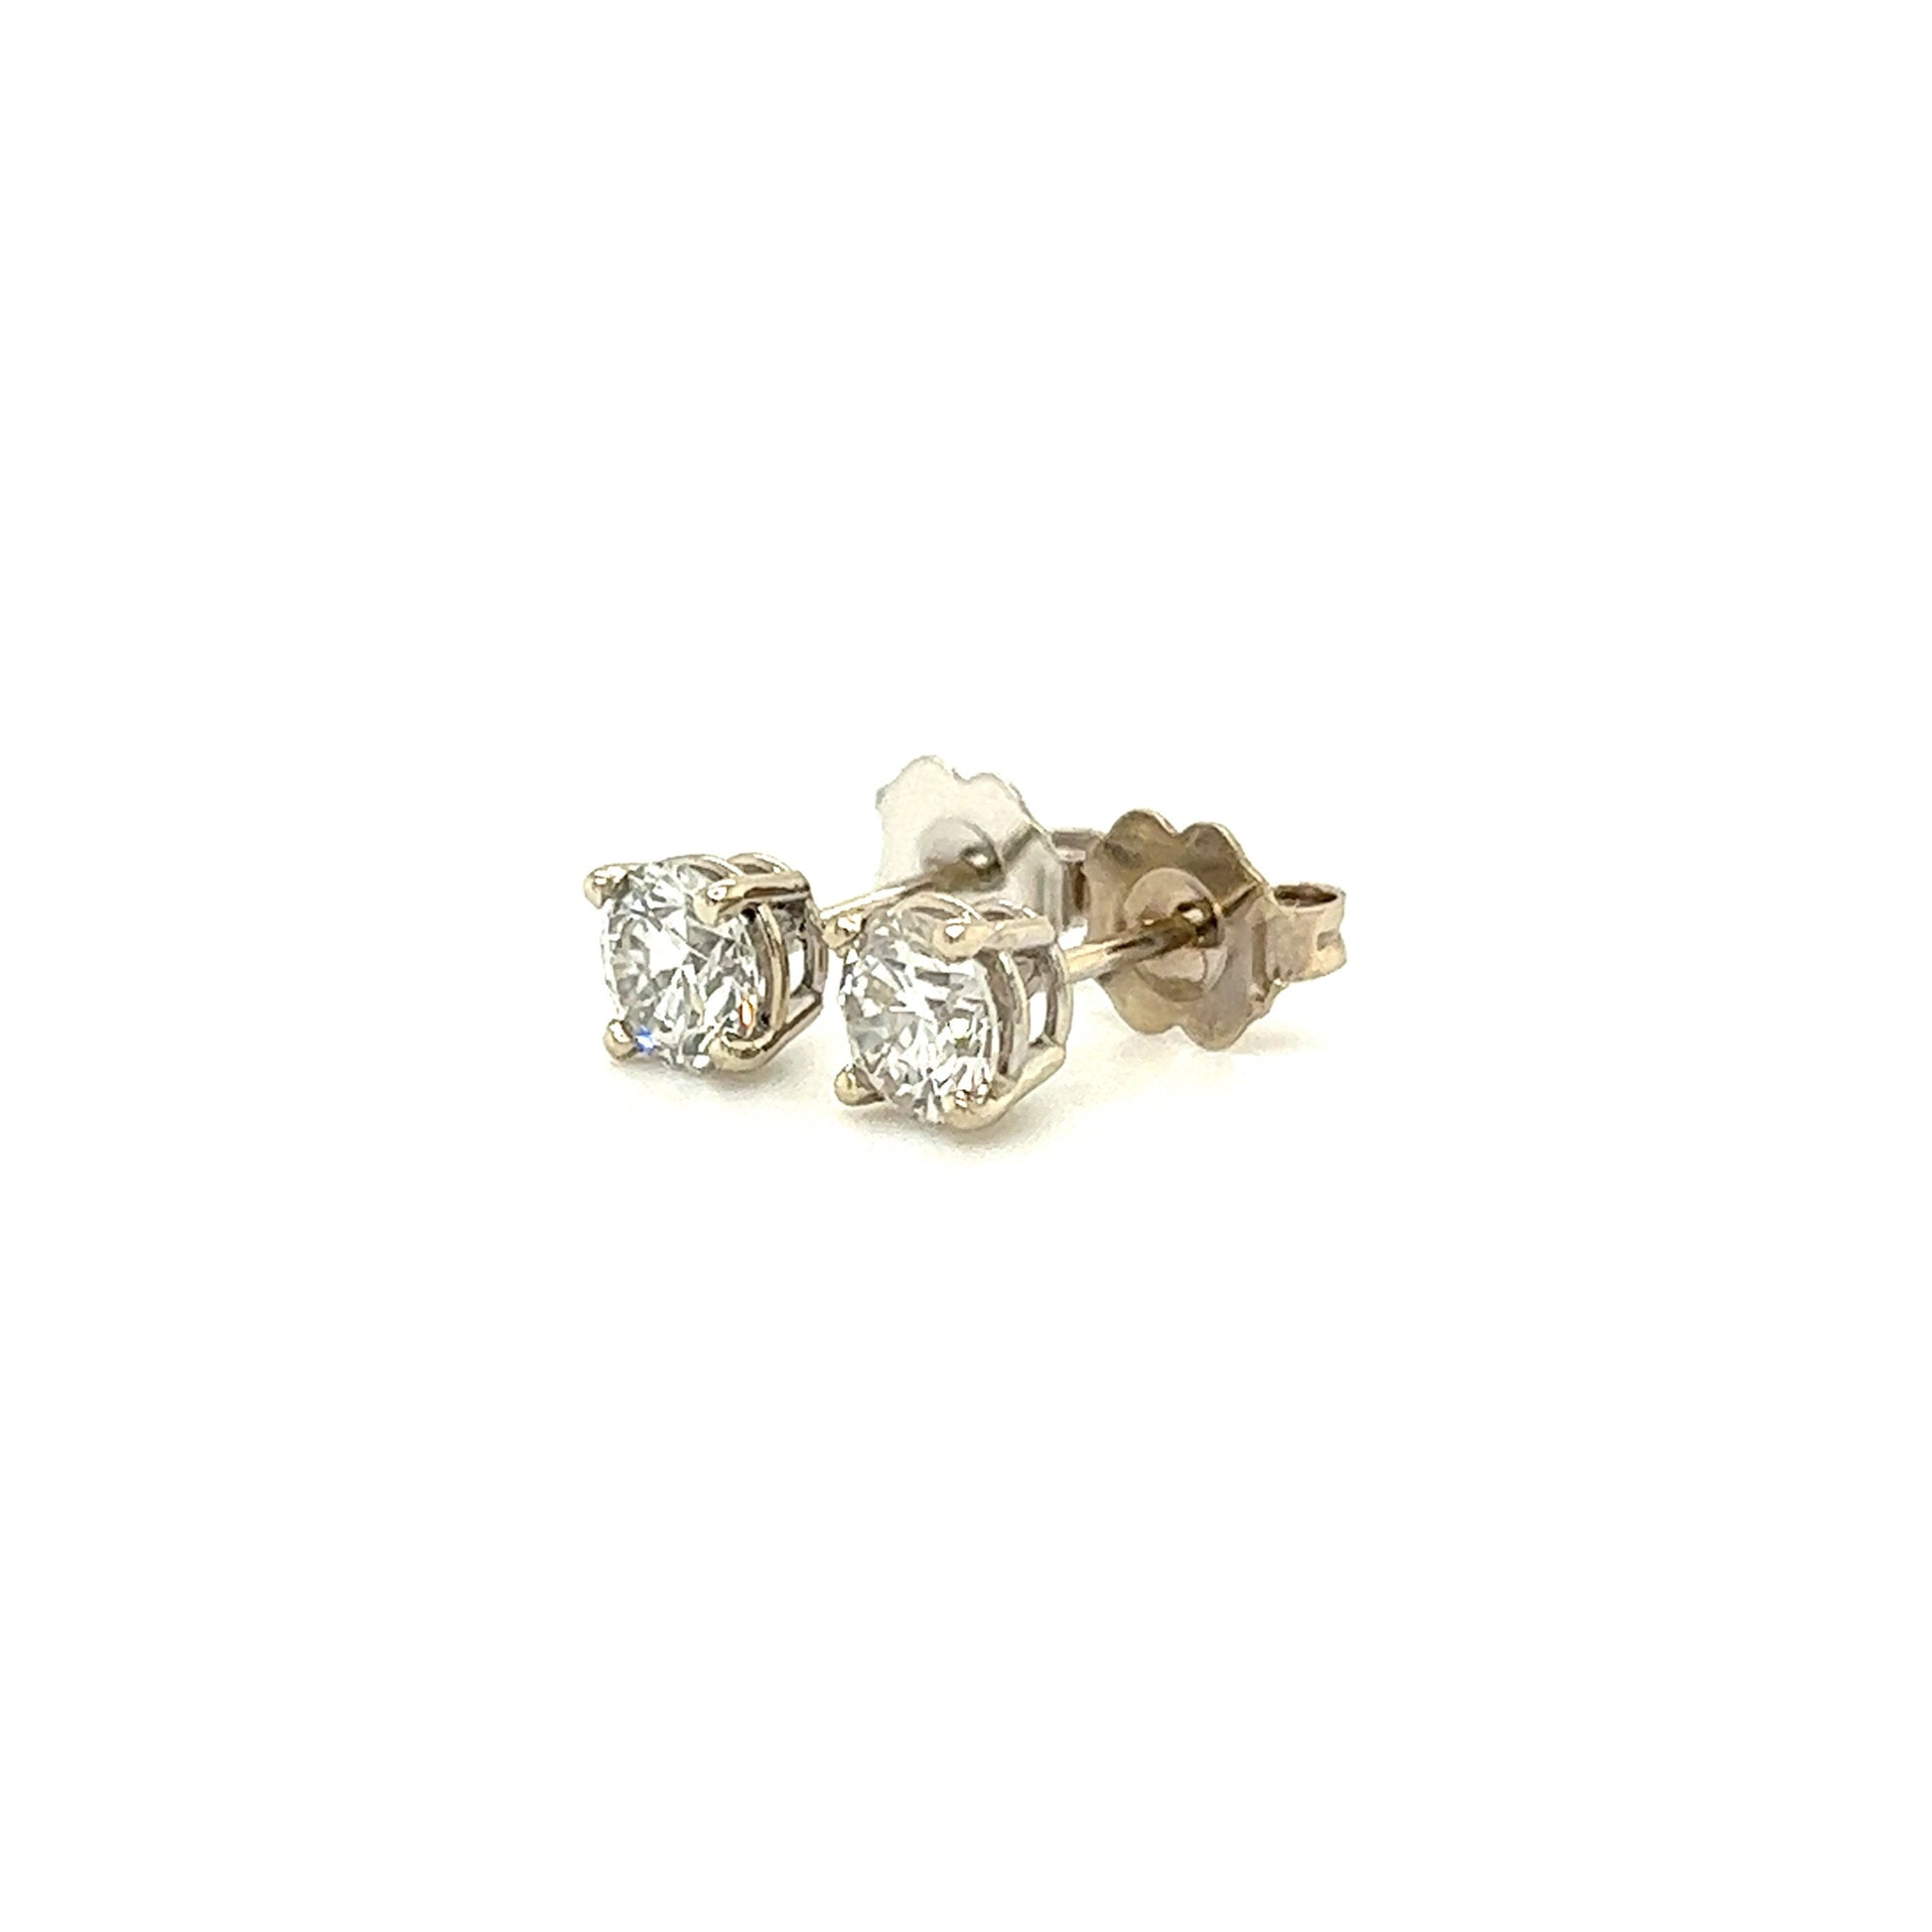 Diamond Stud Earrings with 0.80ctw of Diamonds in 14K White Gold Right Side View